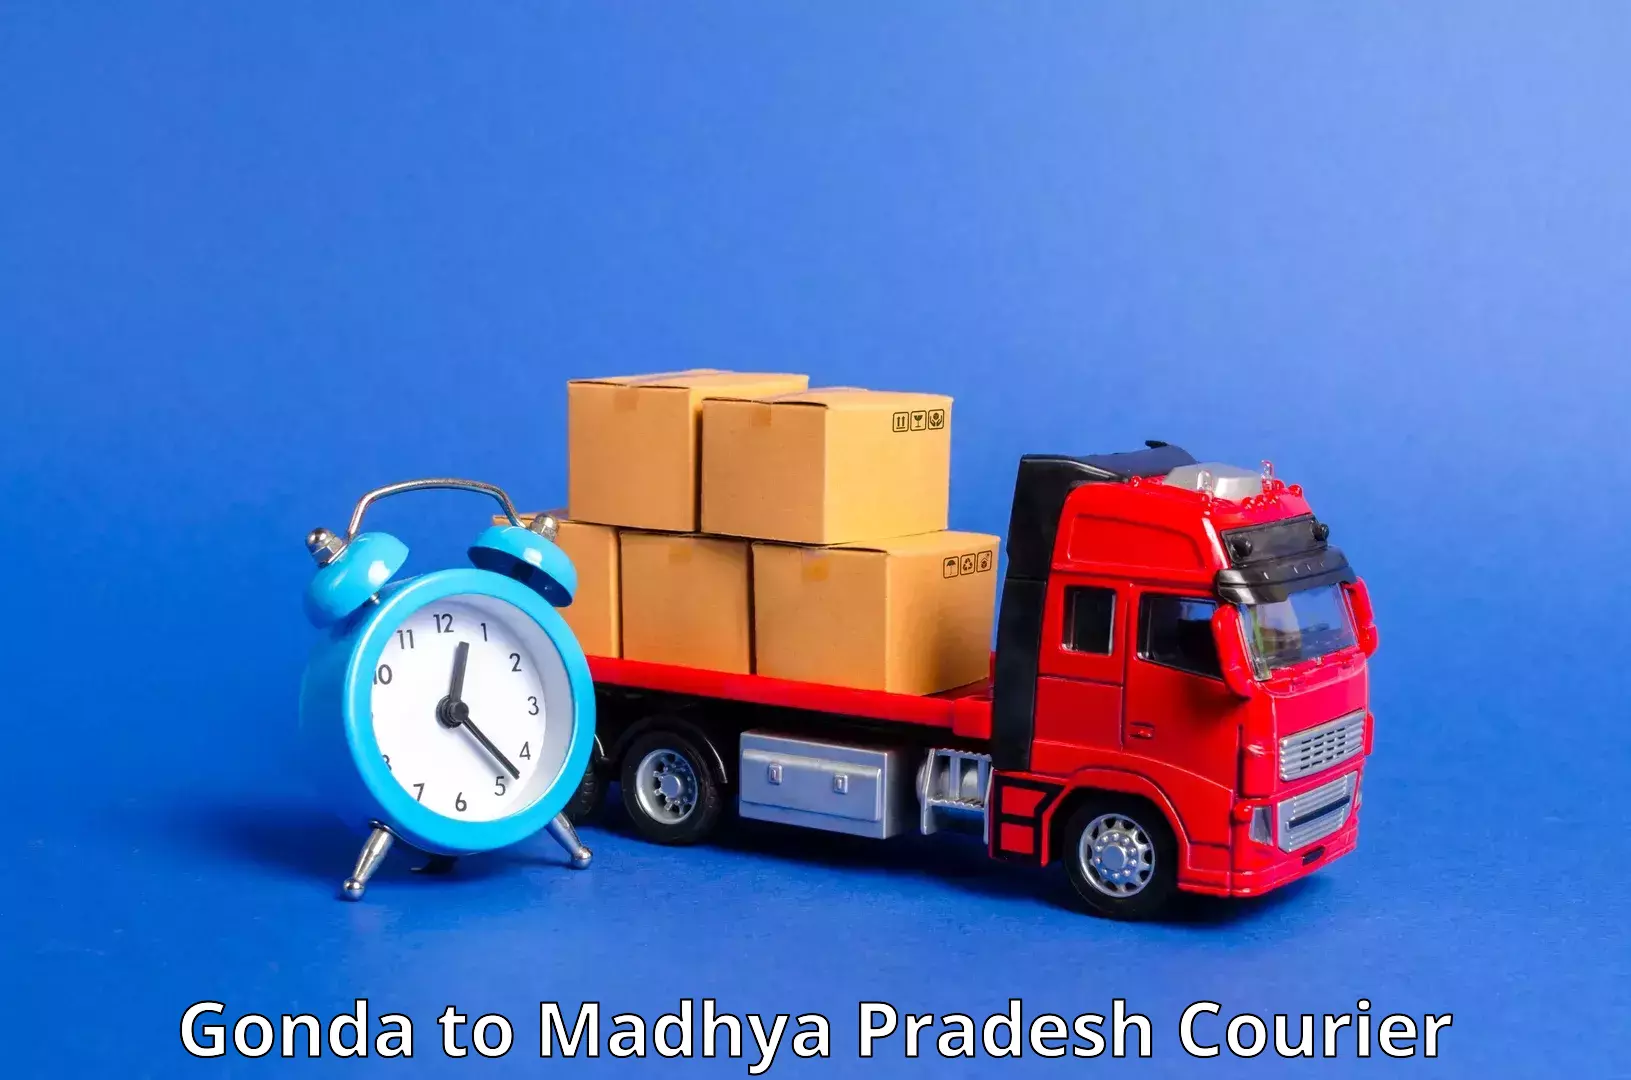 Professional parcel services in Gonda to Depalpur